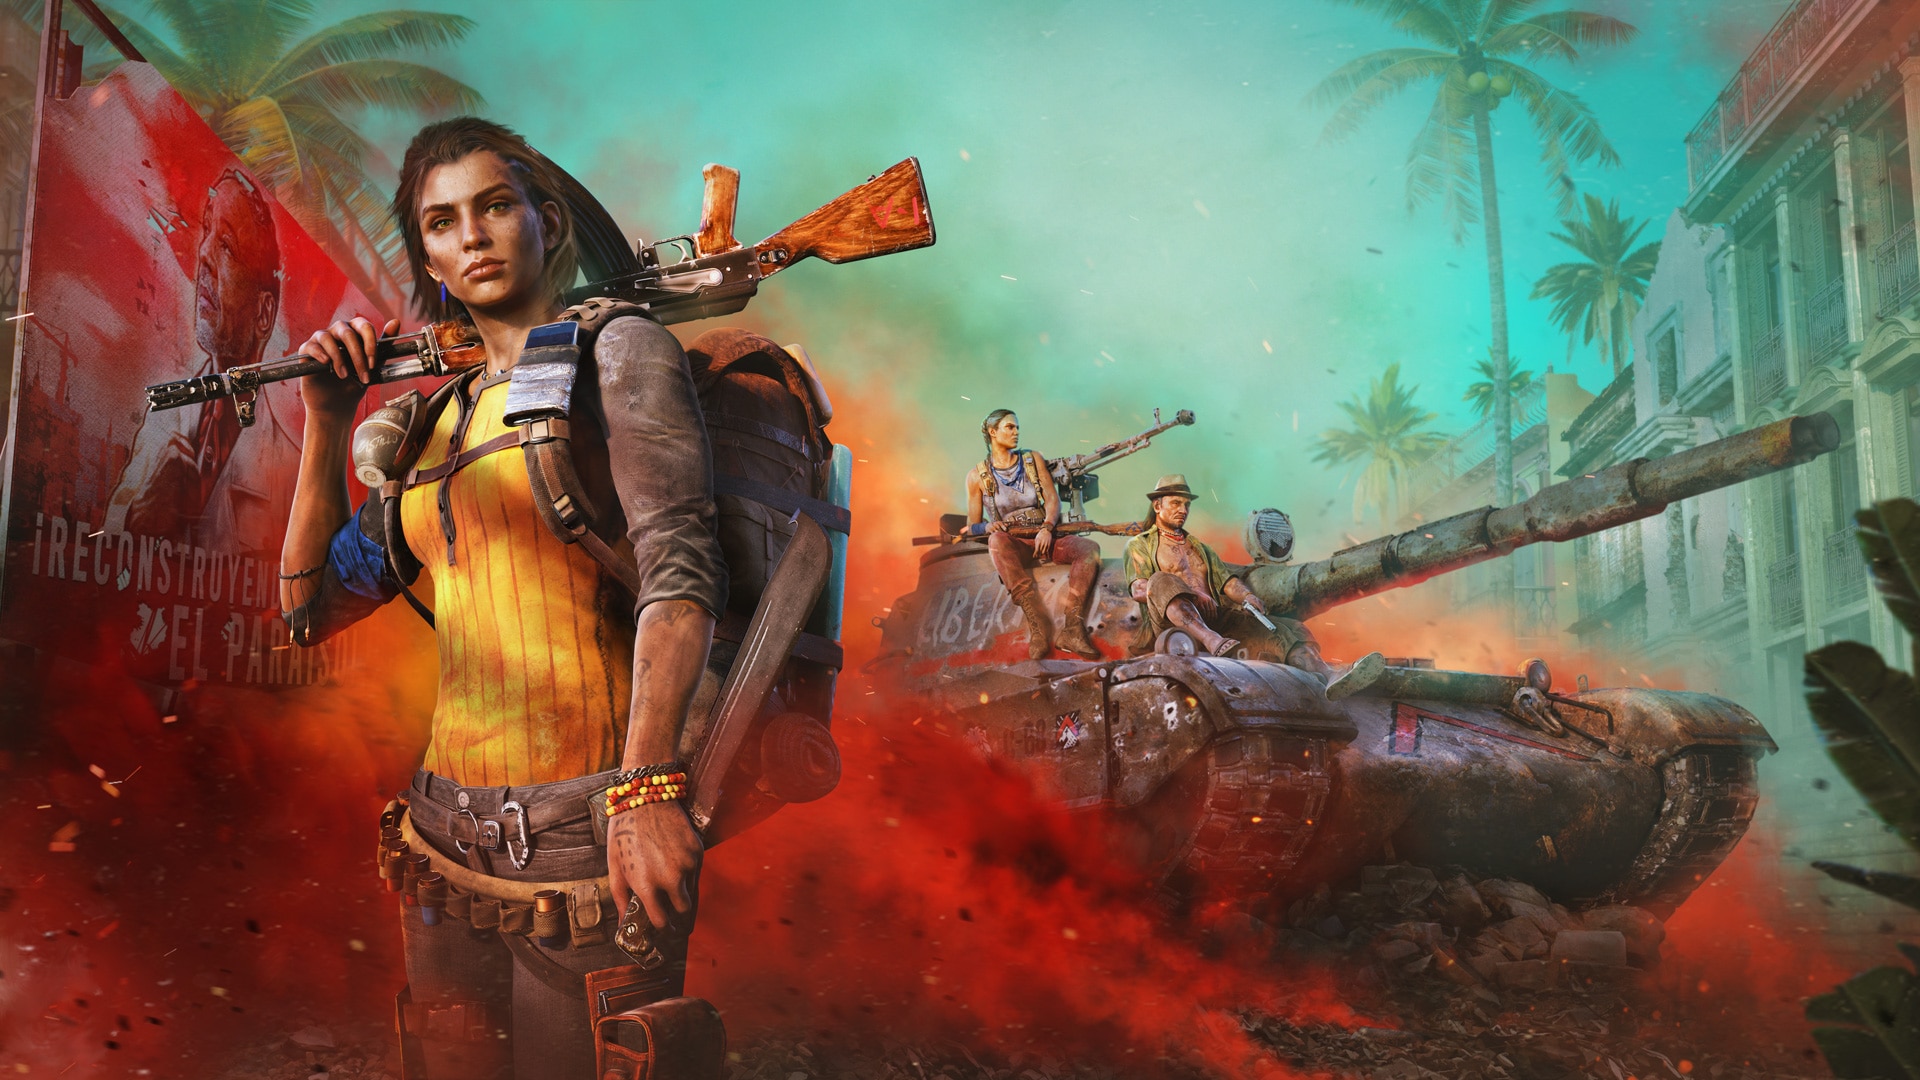 Far Cry 6 Lost Between Worlds DLC Launches in December, Free Trial and New  Game+ Update Now Live — Too Much Gaming